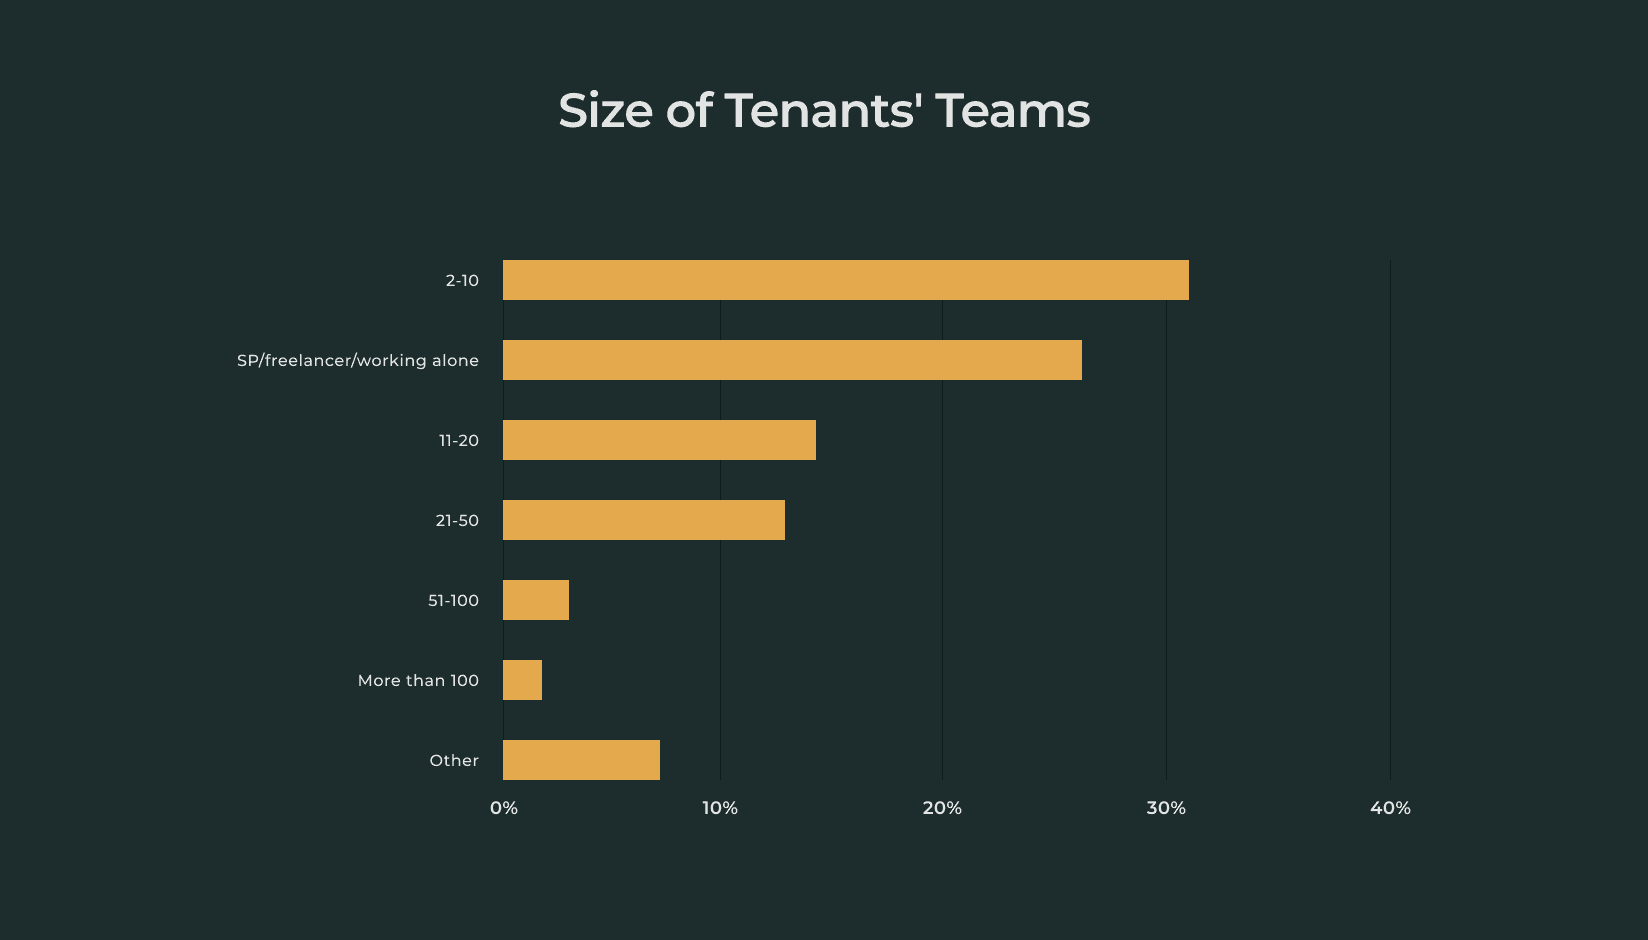 Size of coworking space tenants' teams - Spacebring research